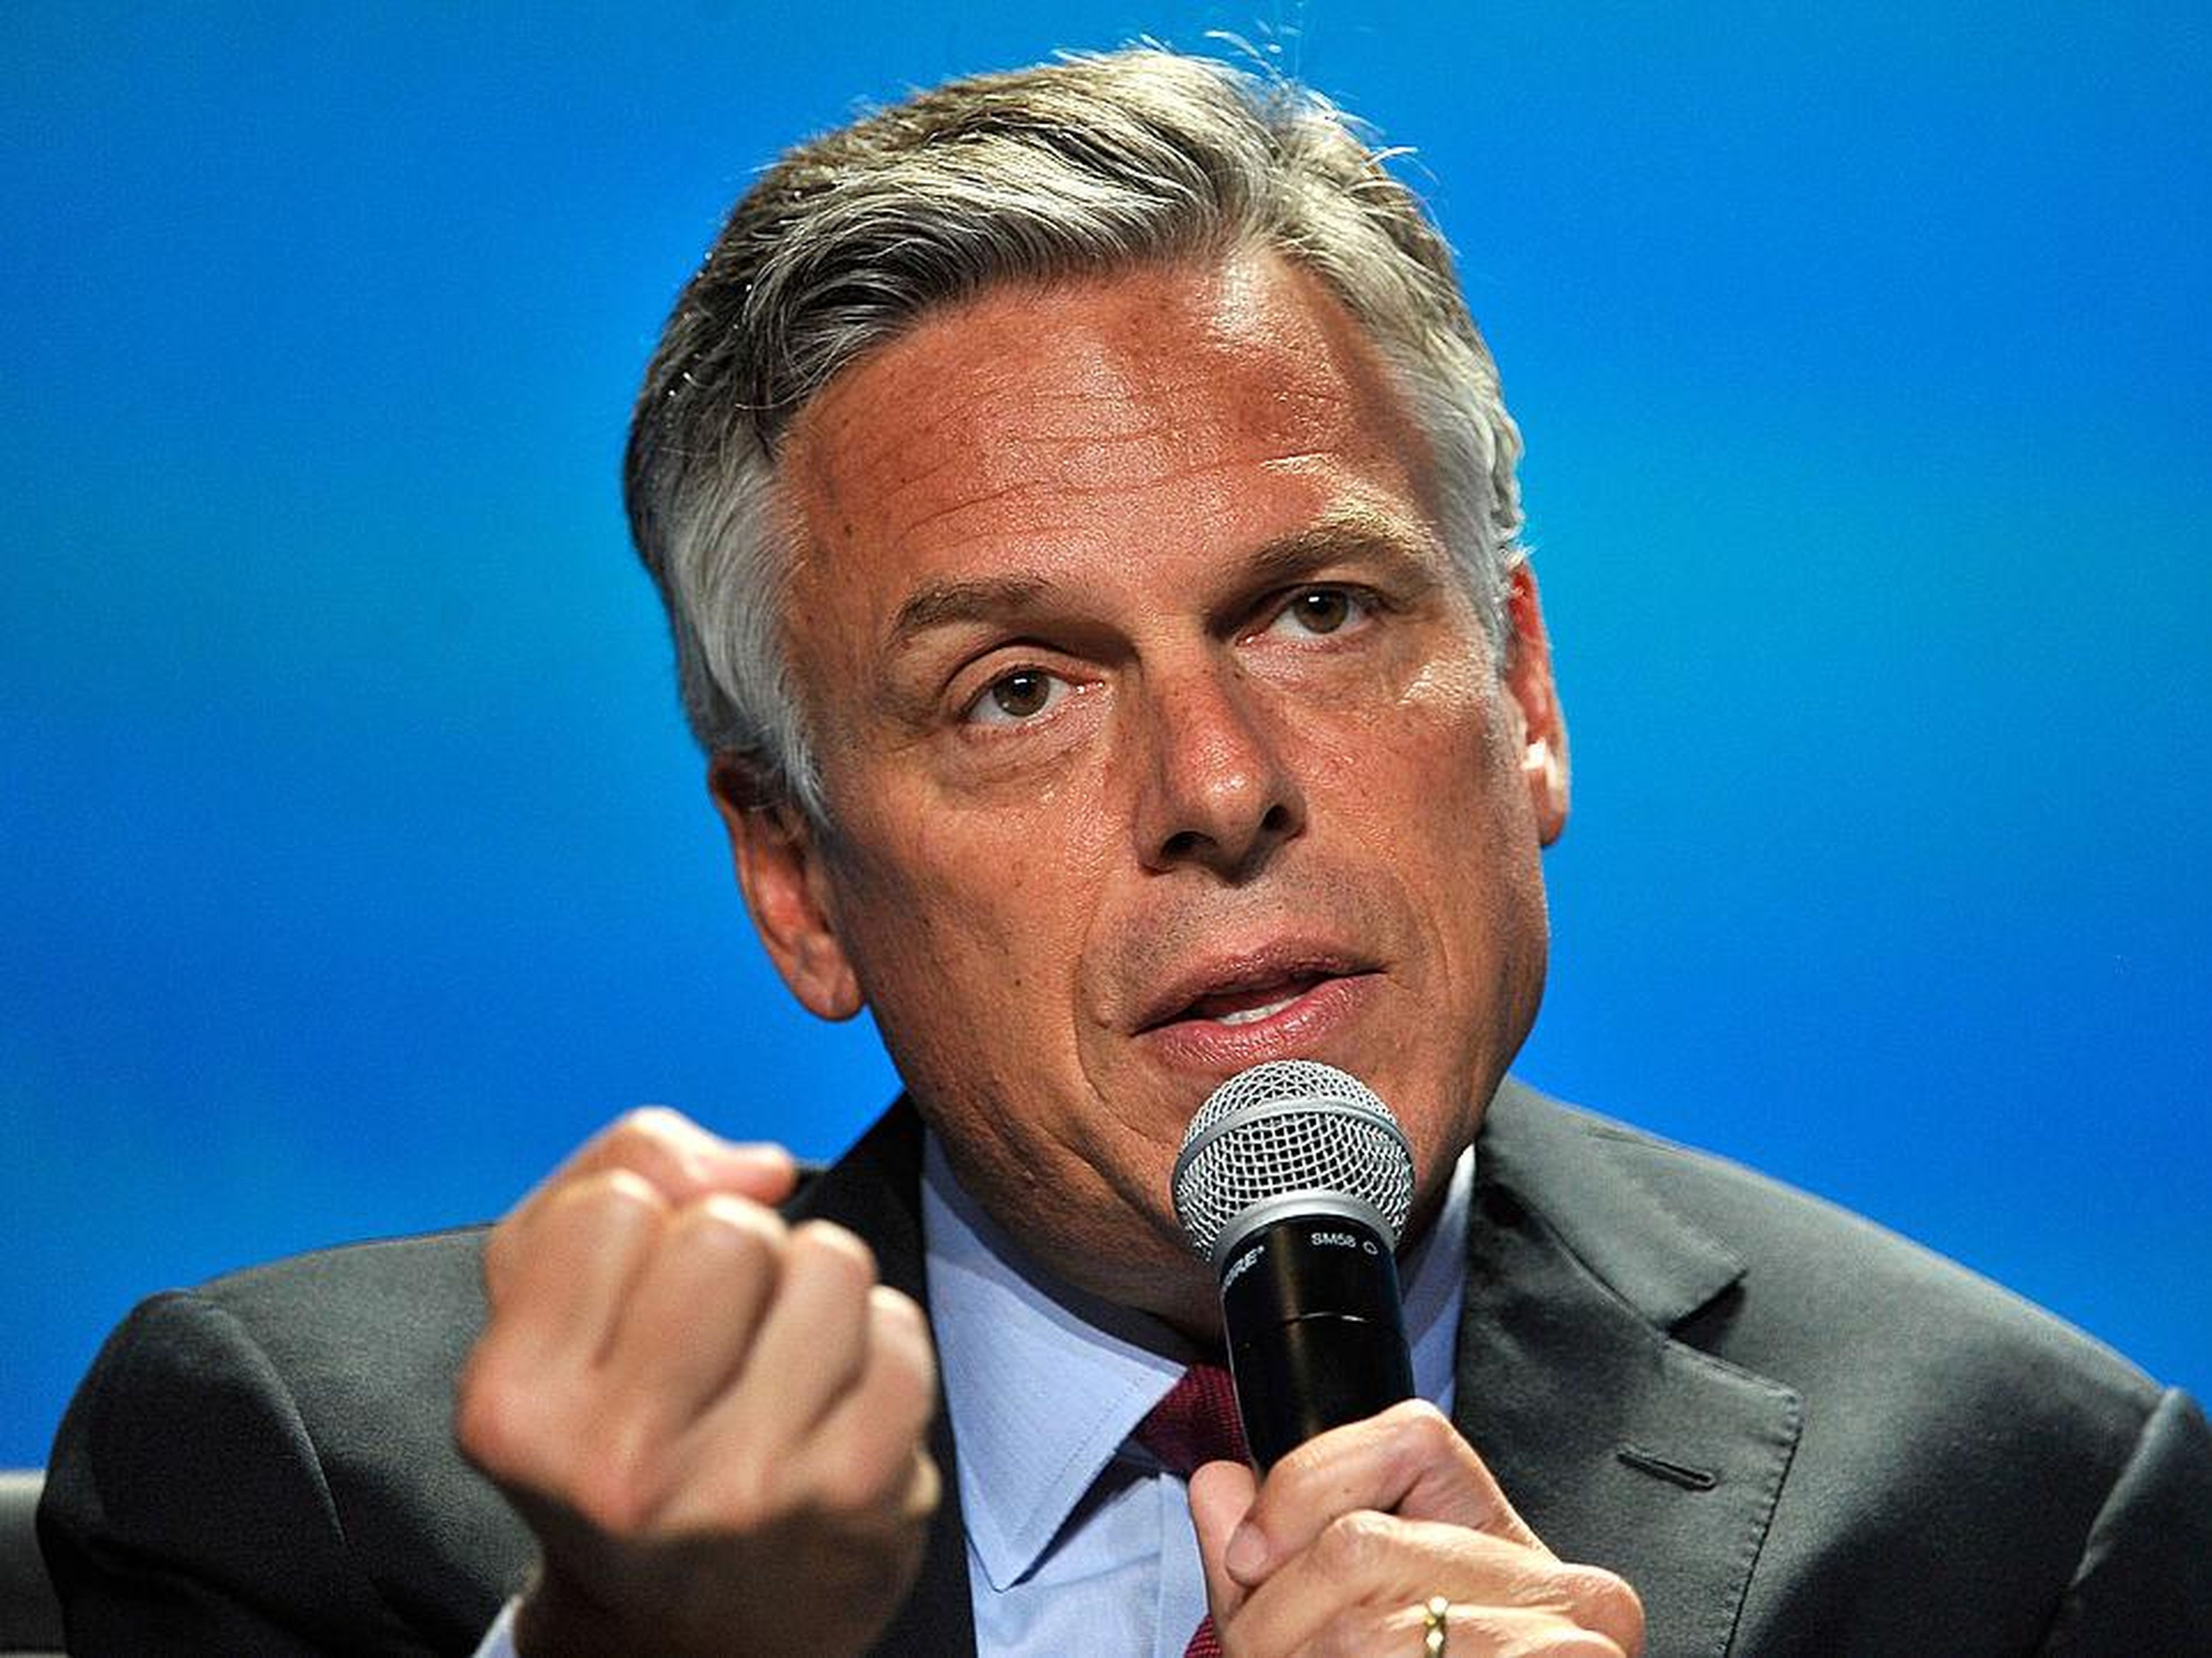 Jon Huntsman Jr. was the governor of Utah in 2008, when the state became the first to require state employees to work four days a week.